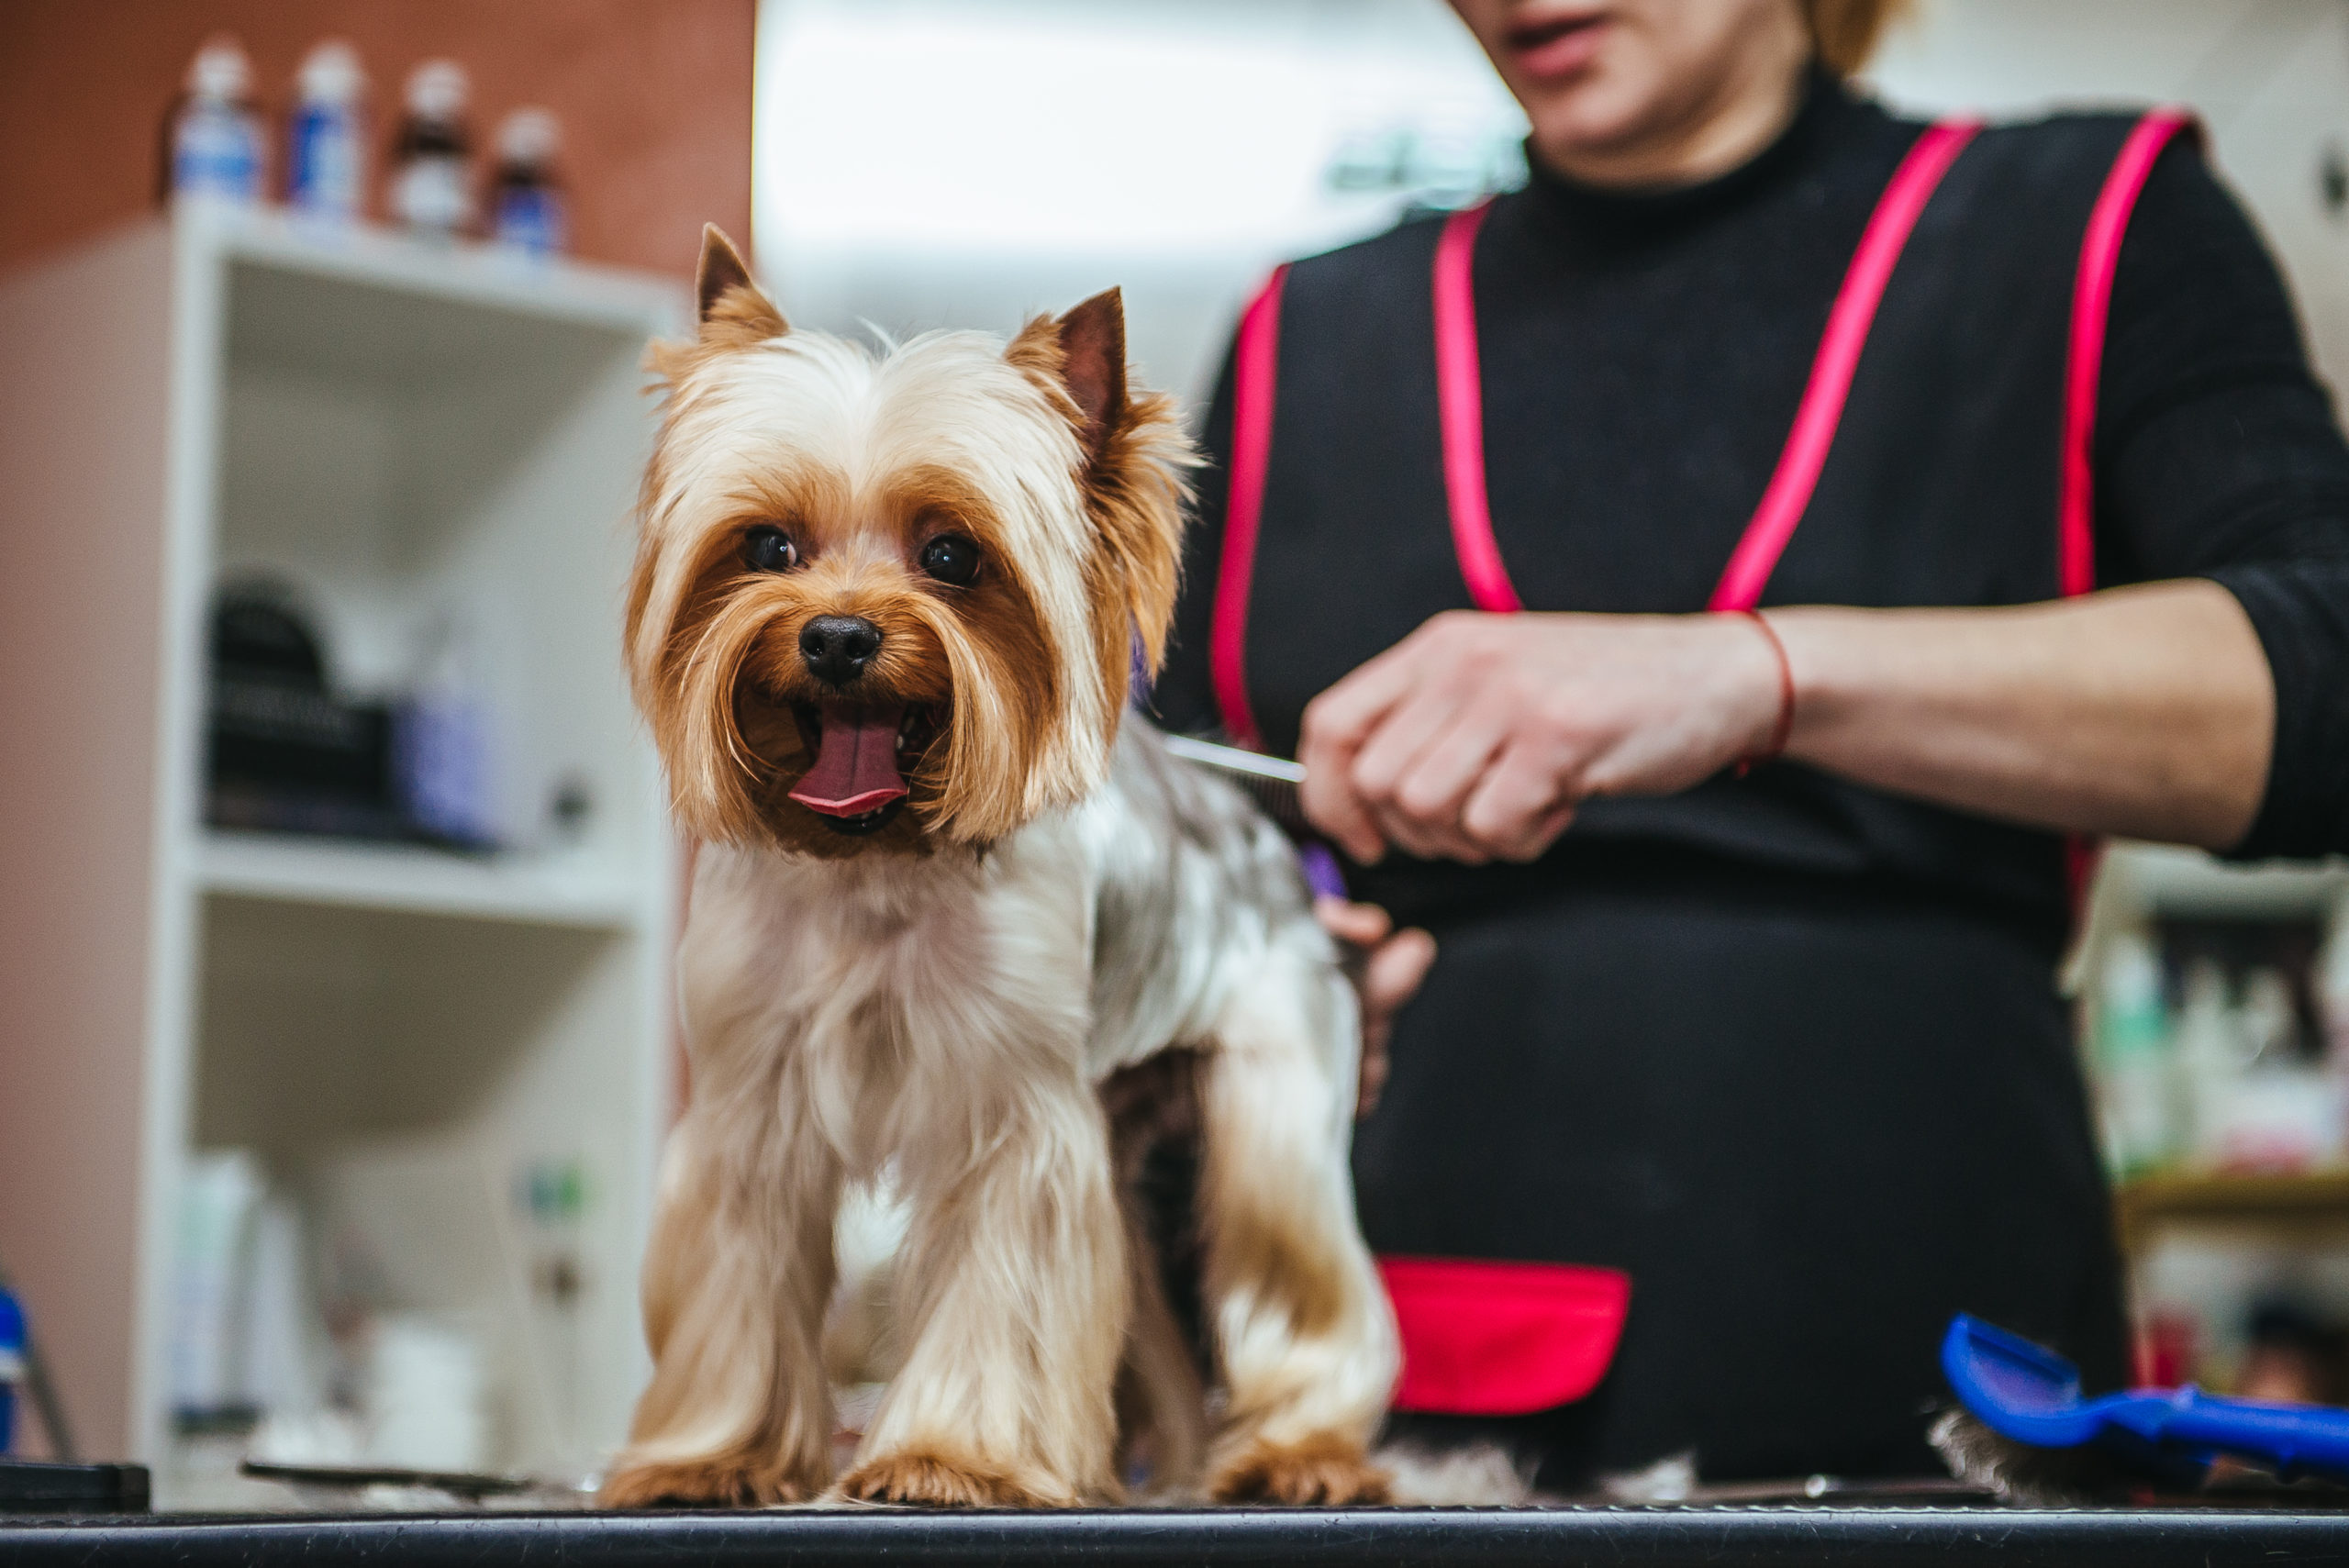 Yorkie being treated with specialty grooming